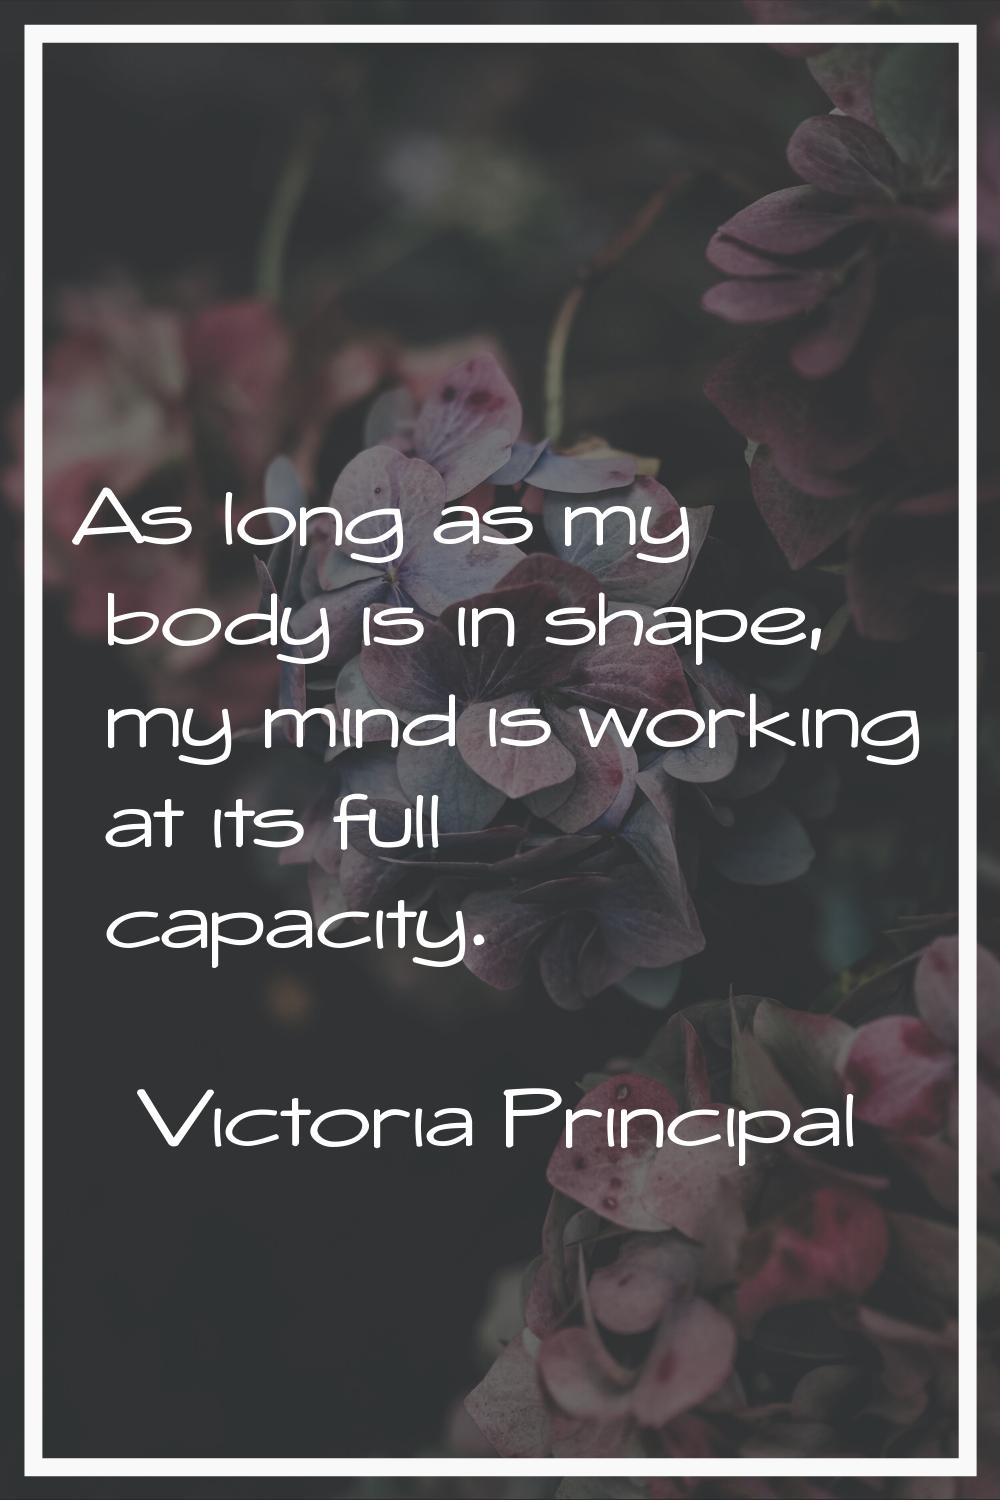 As long as my body is in shape, my mind is working at its full capacity.